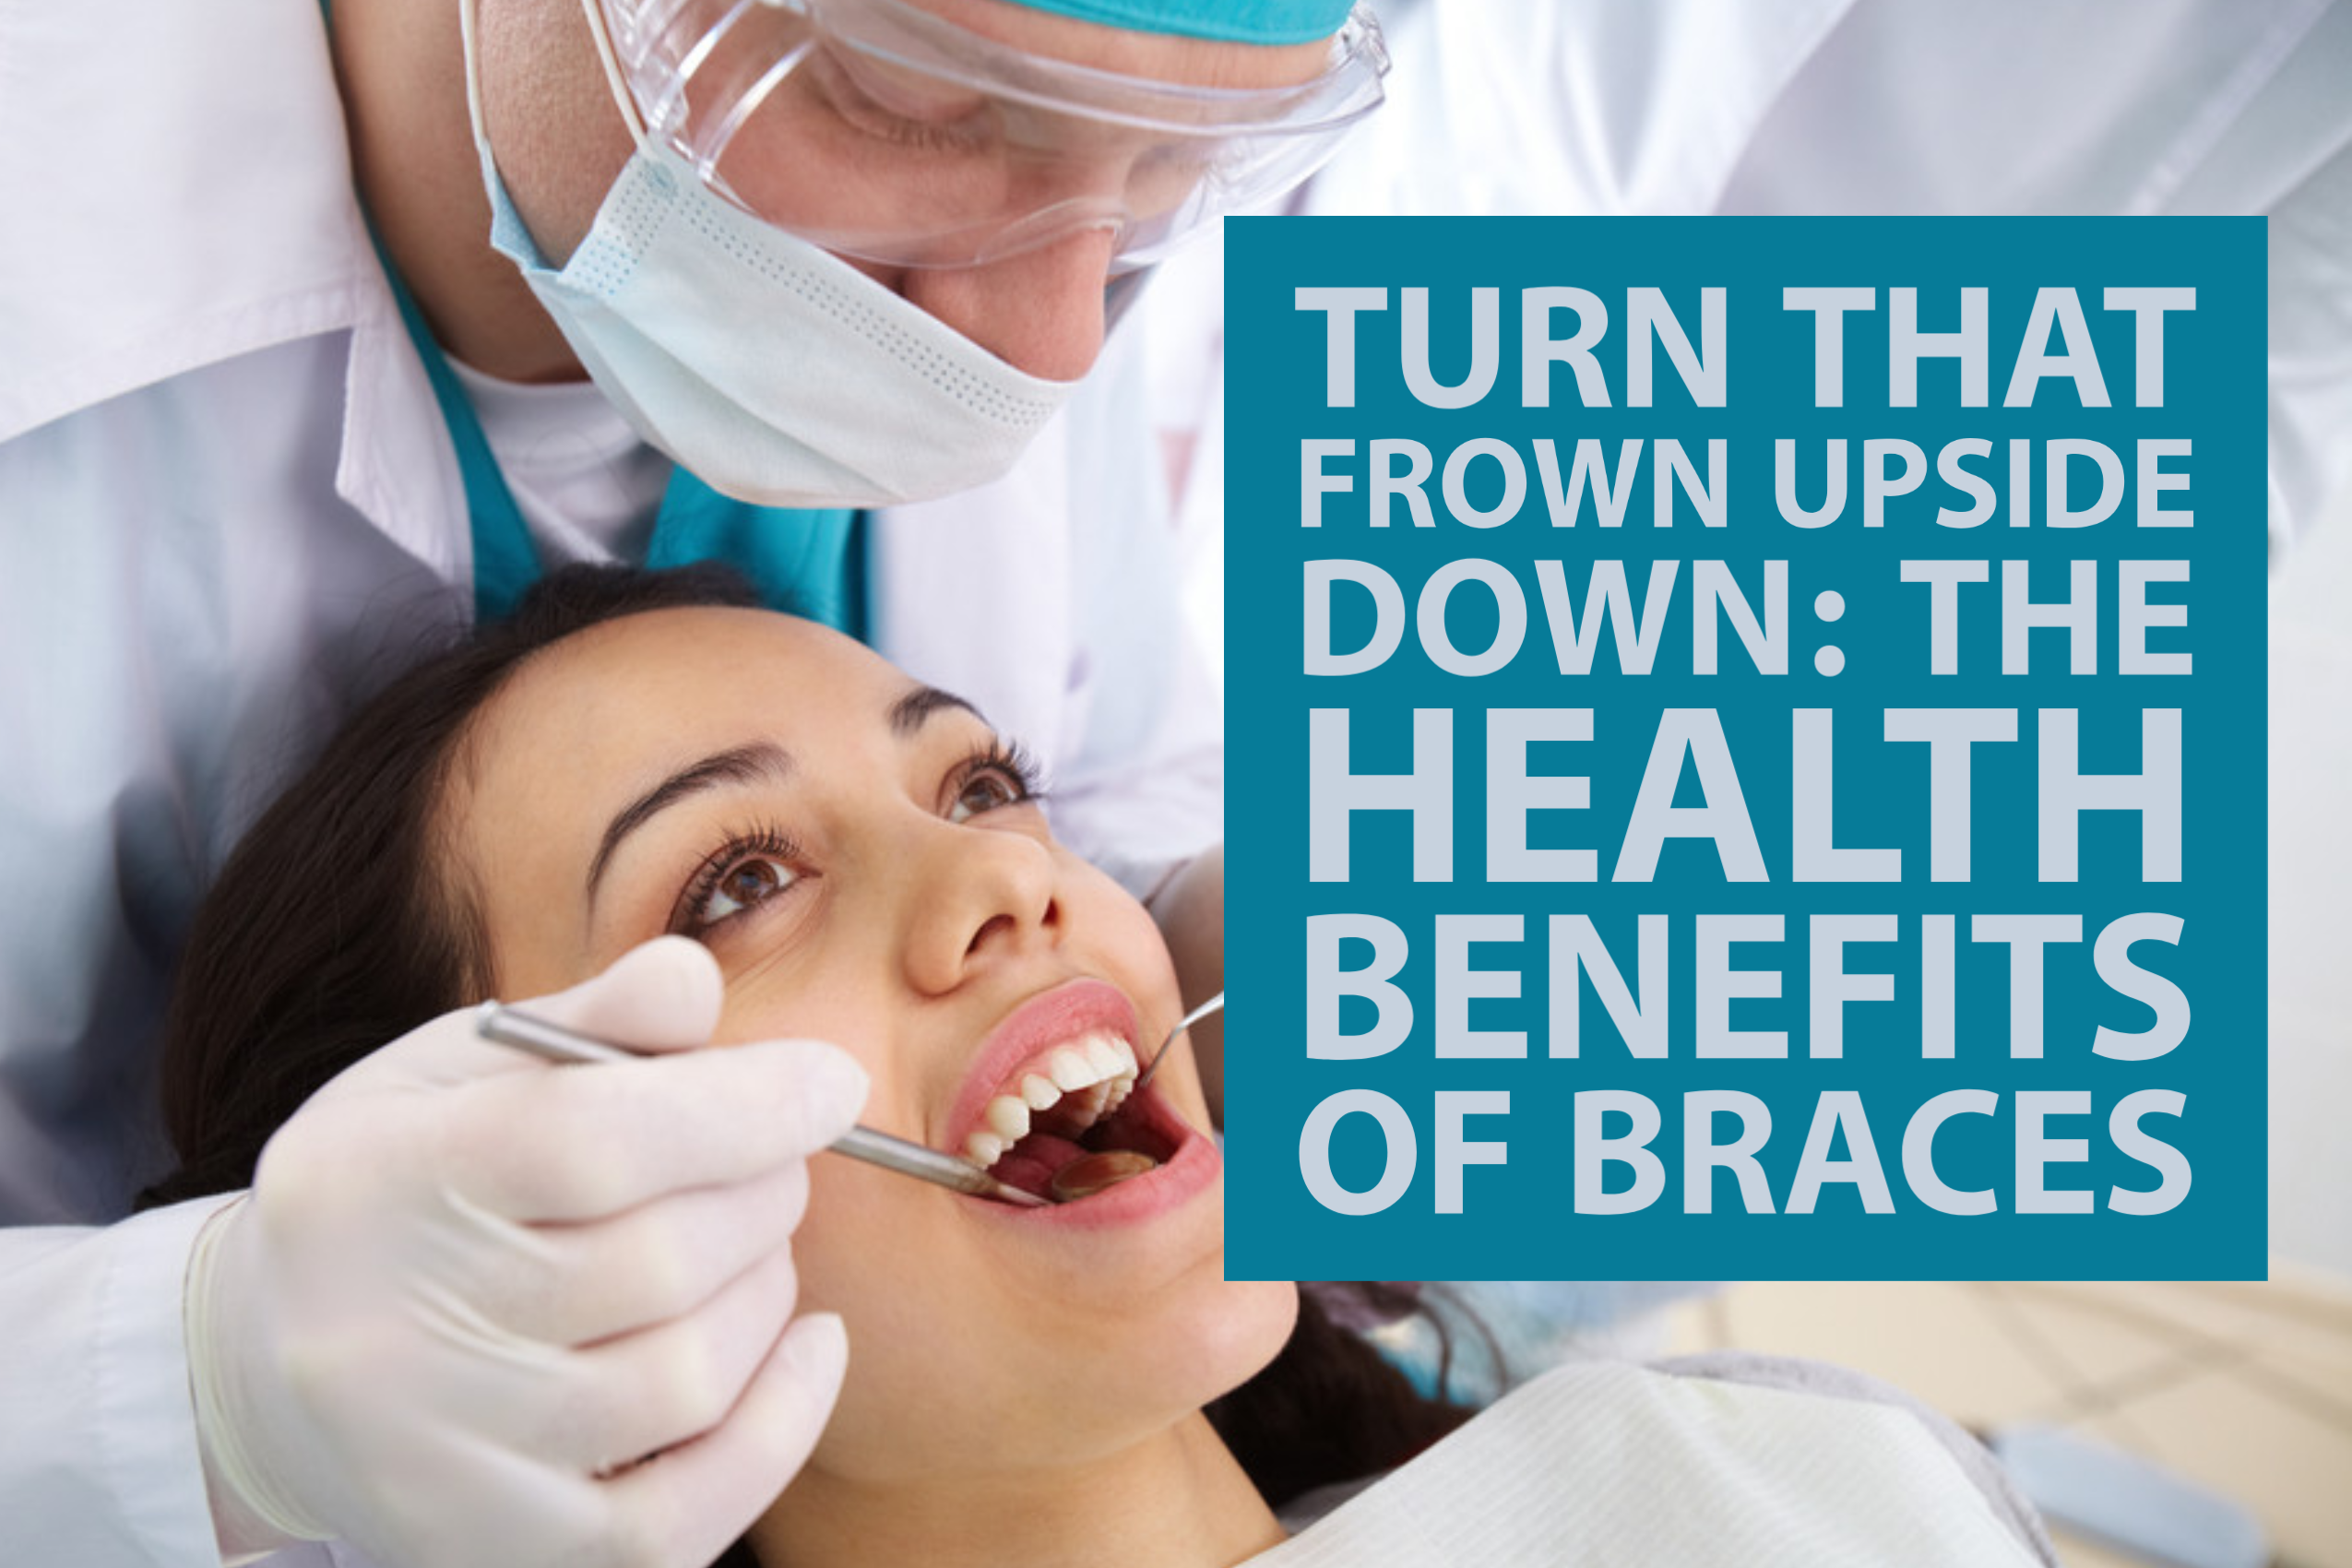 Turn That Frown Upside Down: The Health Benefits of Braces